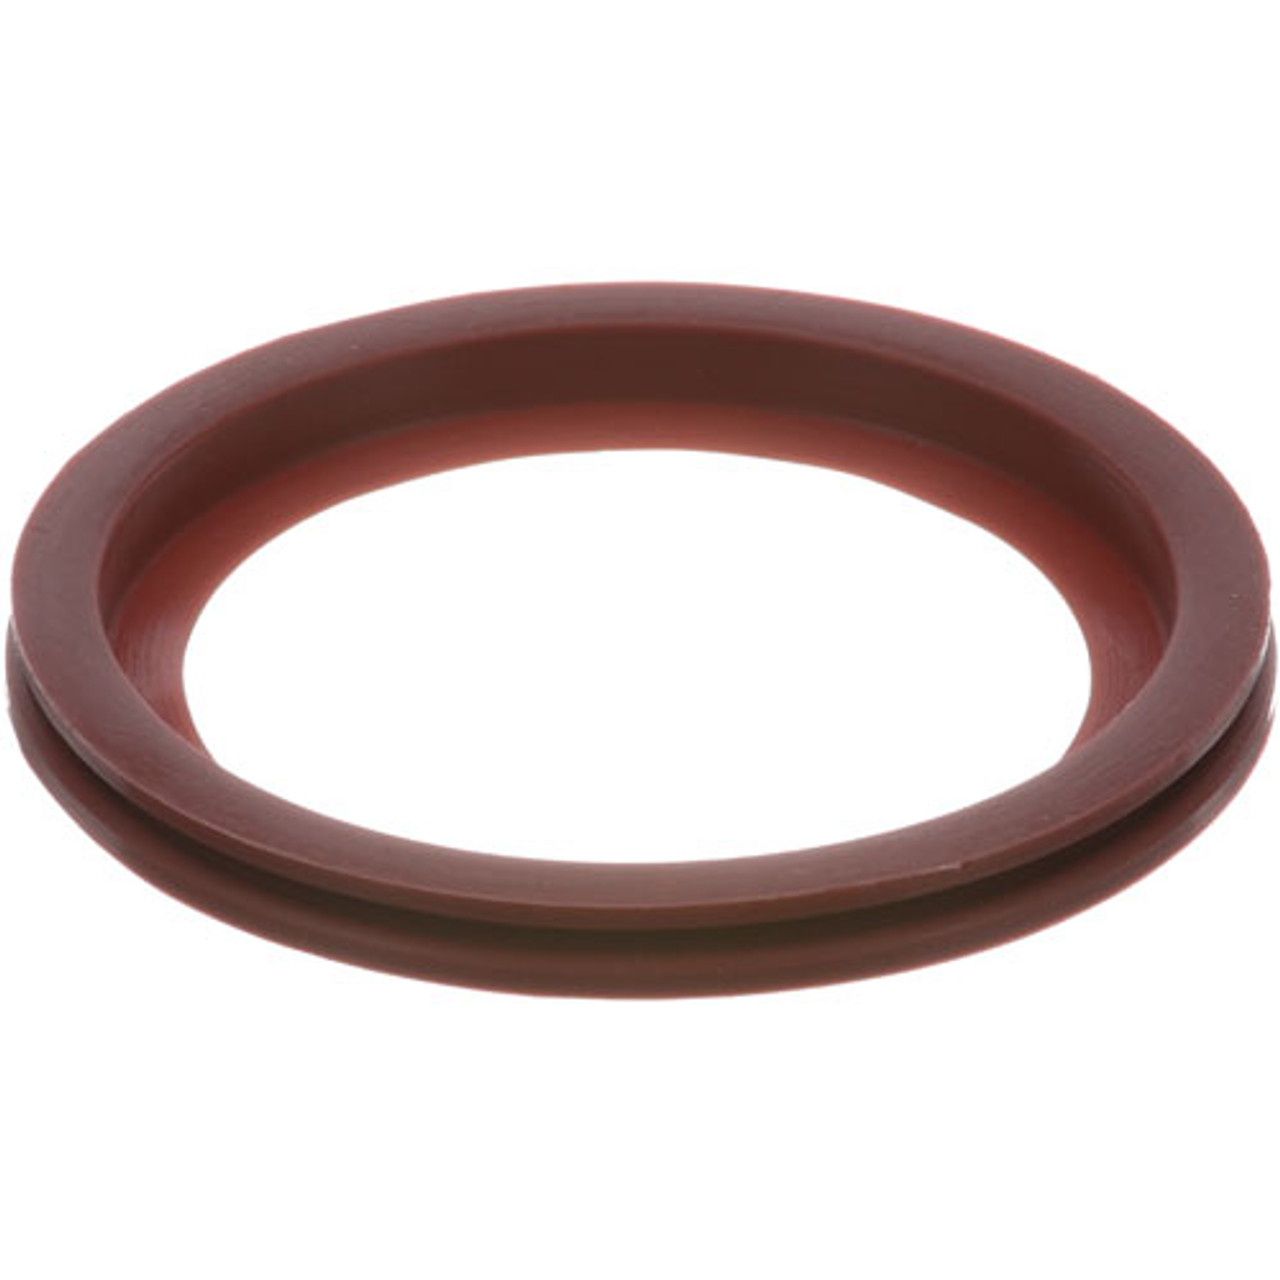 Gasket,Bowl , M# Msd 10/20/30 - Replacement Part For Omega PMT-S-6655